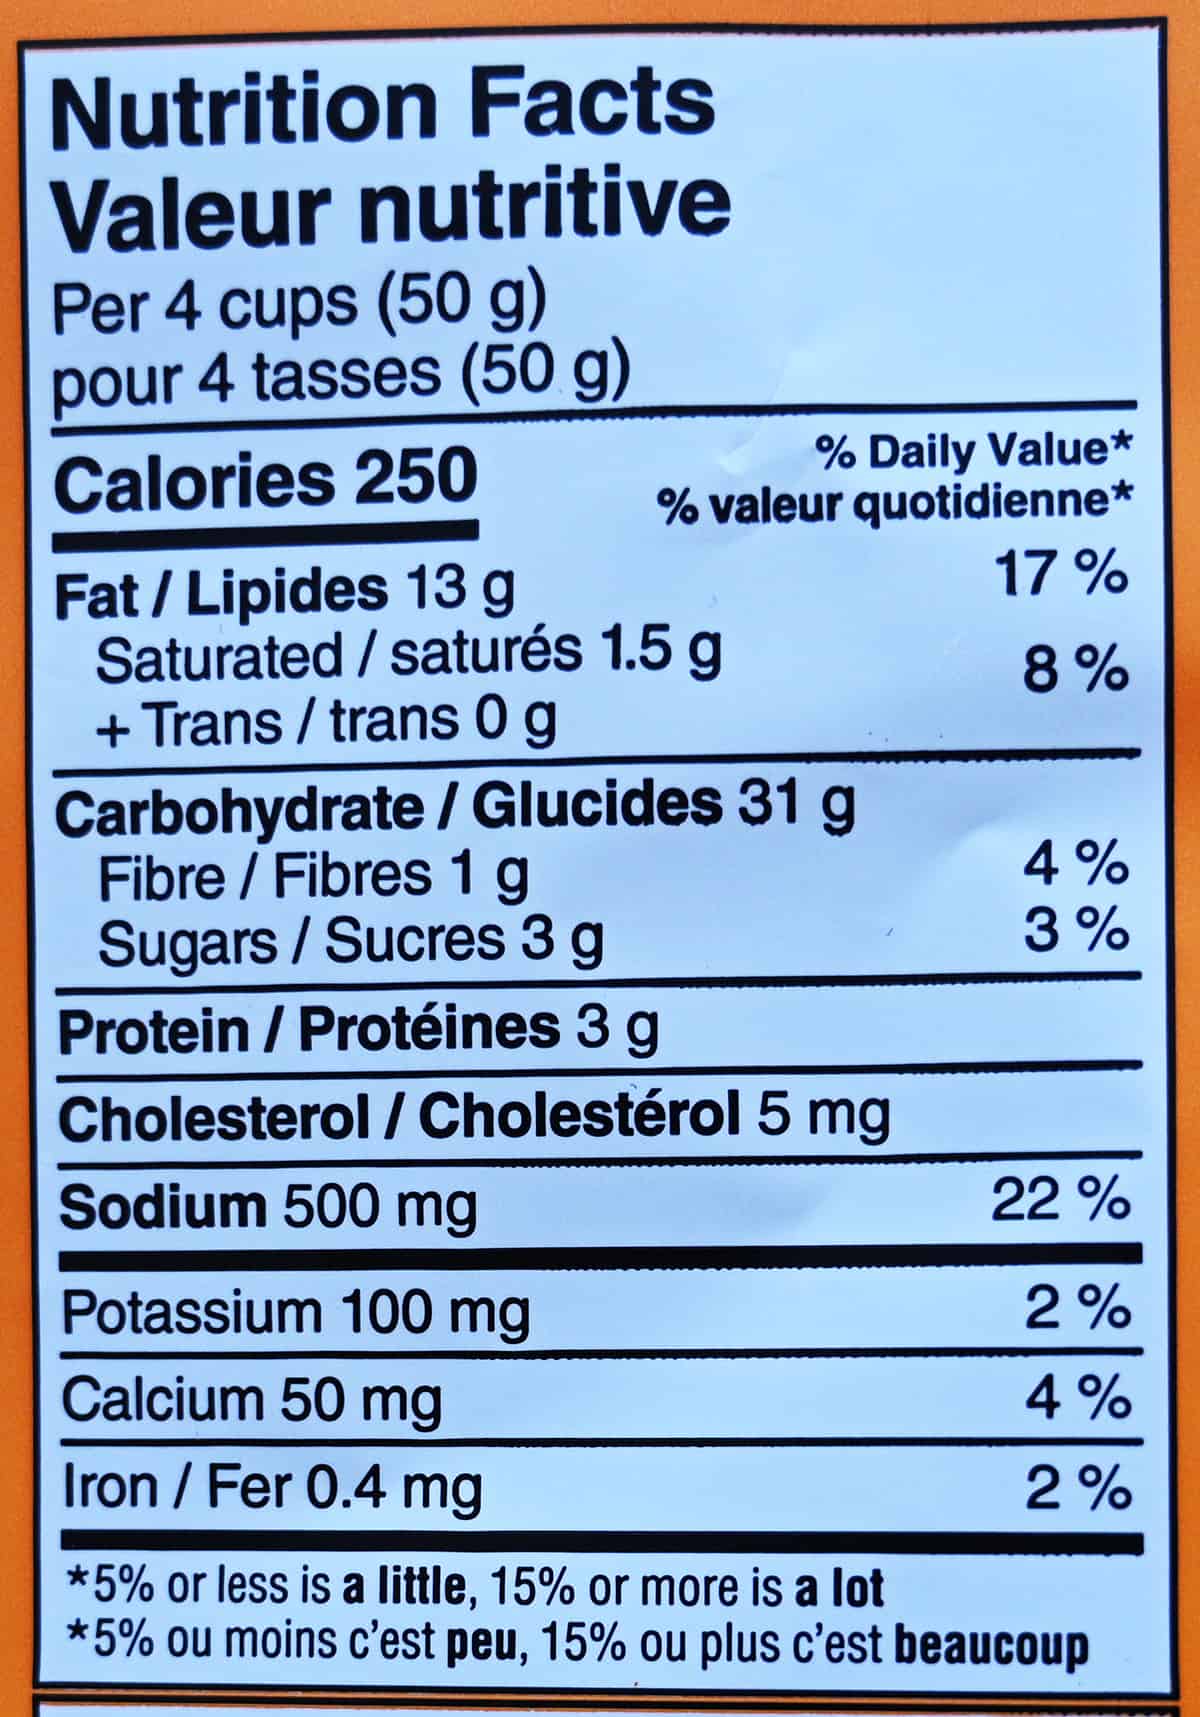 Image of the nutrition facts label from the back of the bag.